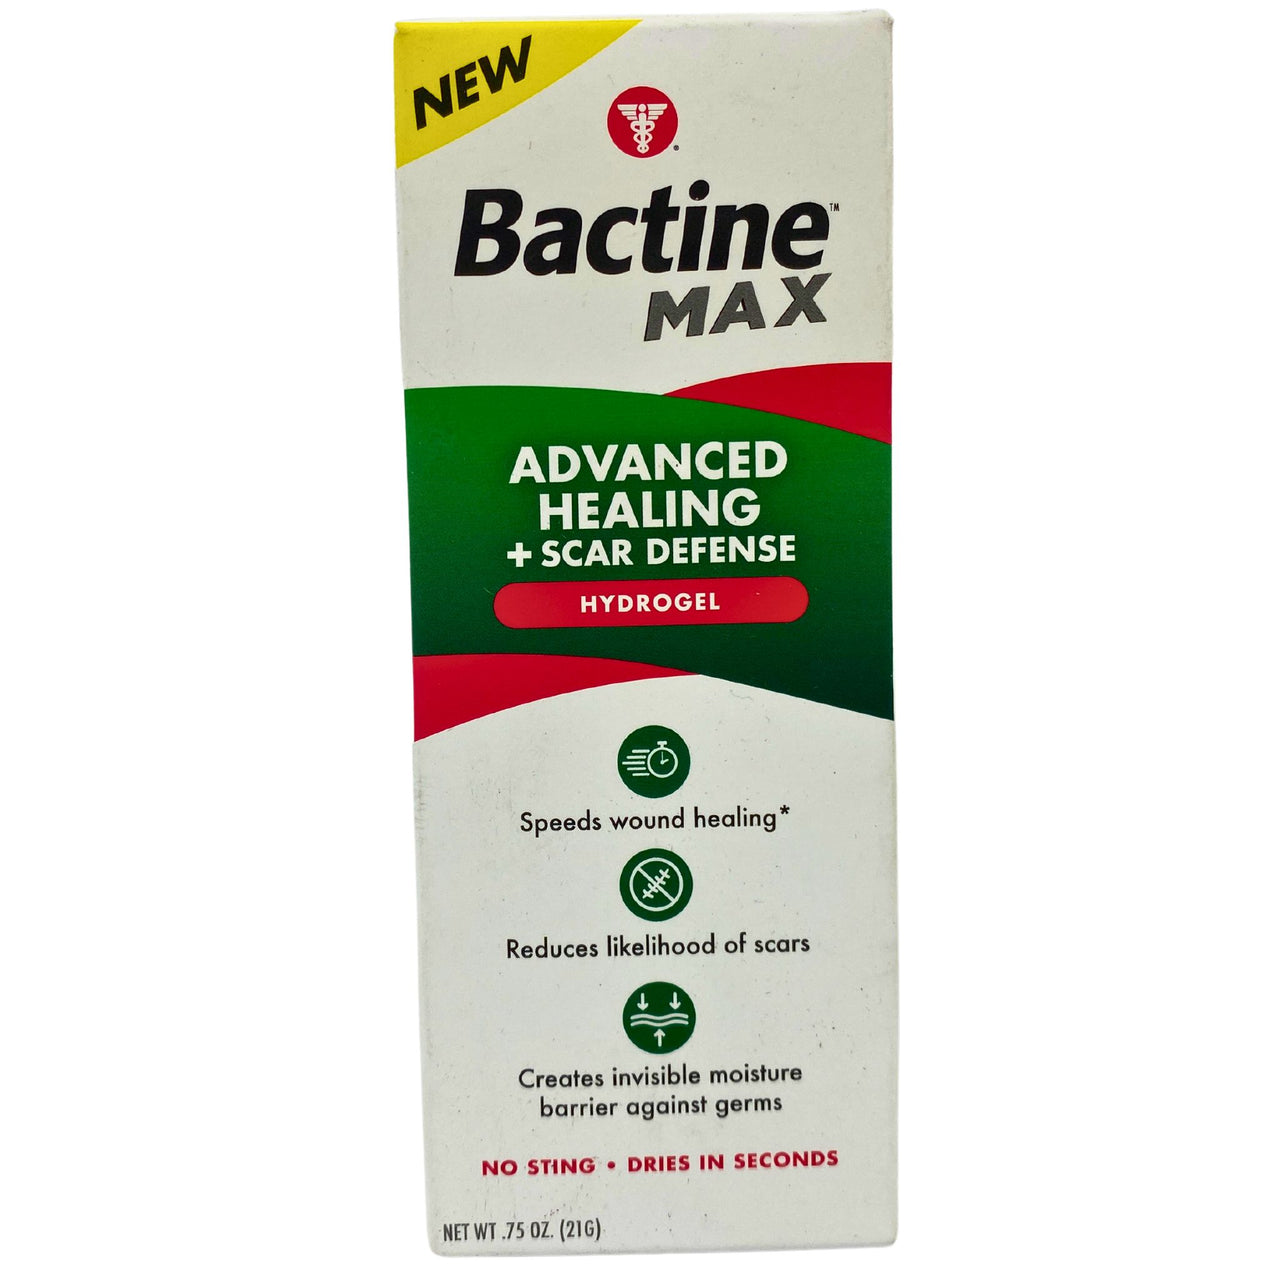 Bactine Max Advanced Healing + Scar Defense Hydrogel no sting dries in seconds